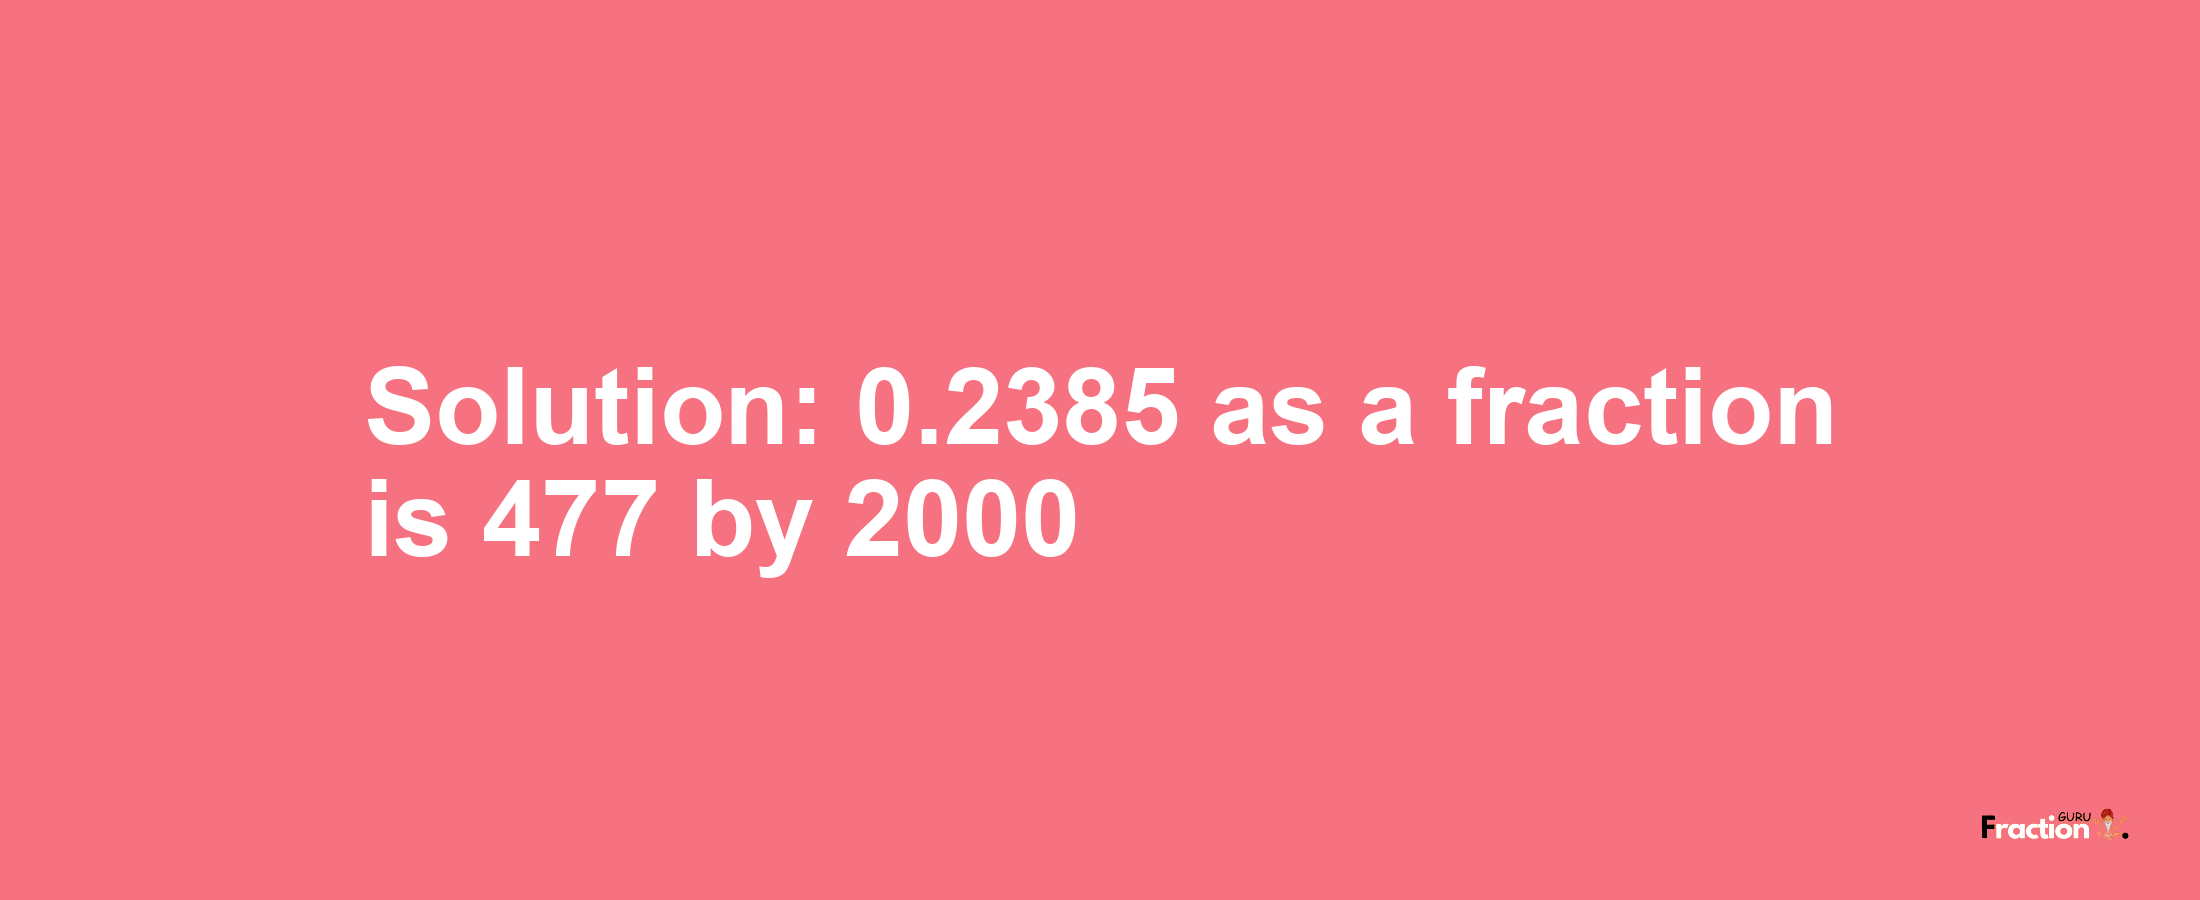 Solution:0.2385 as a fraction is 477/2000